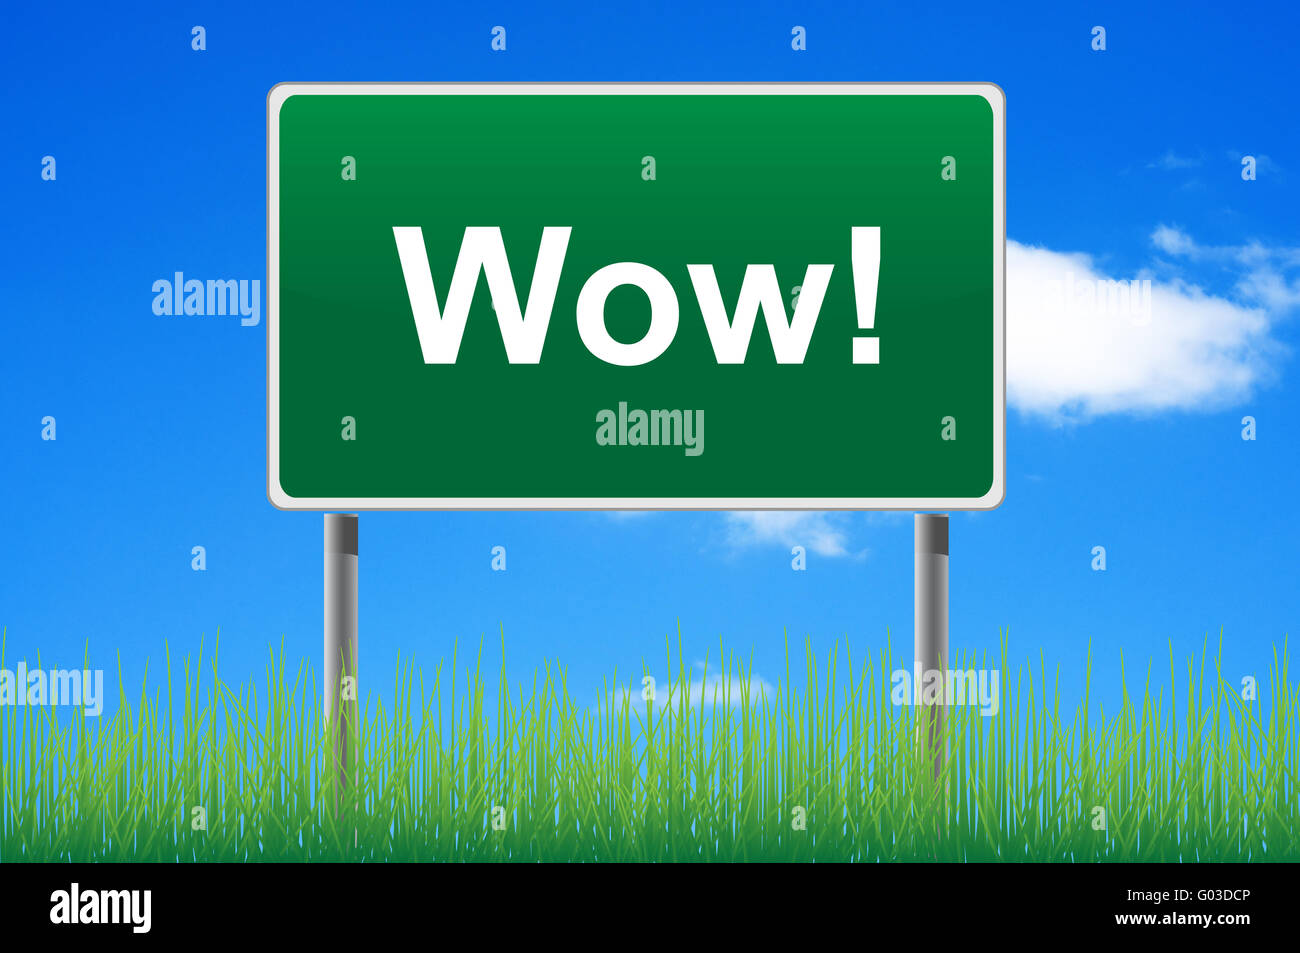 Wow road sign on sky background. Bottom grass. Stock Photo